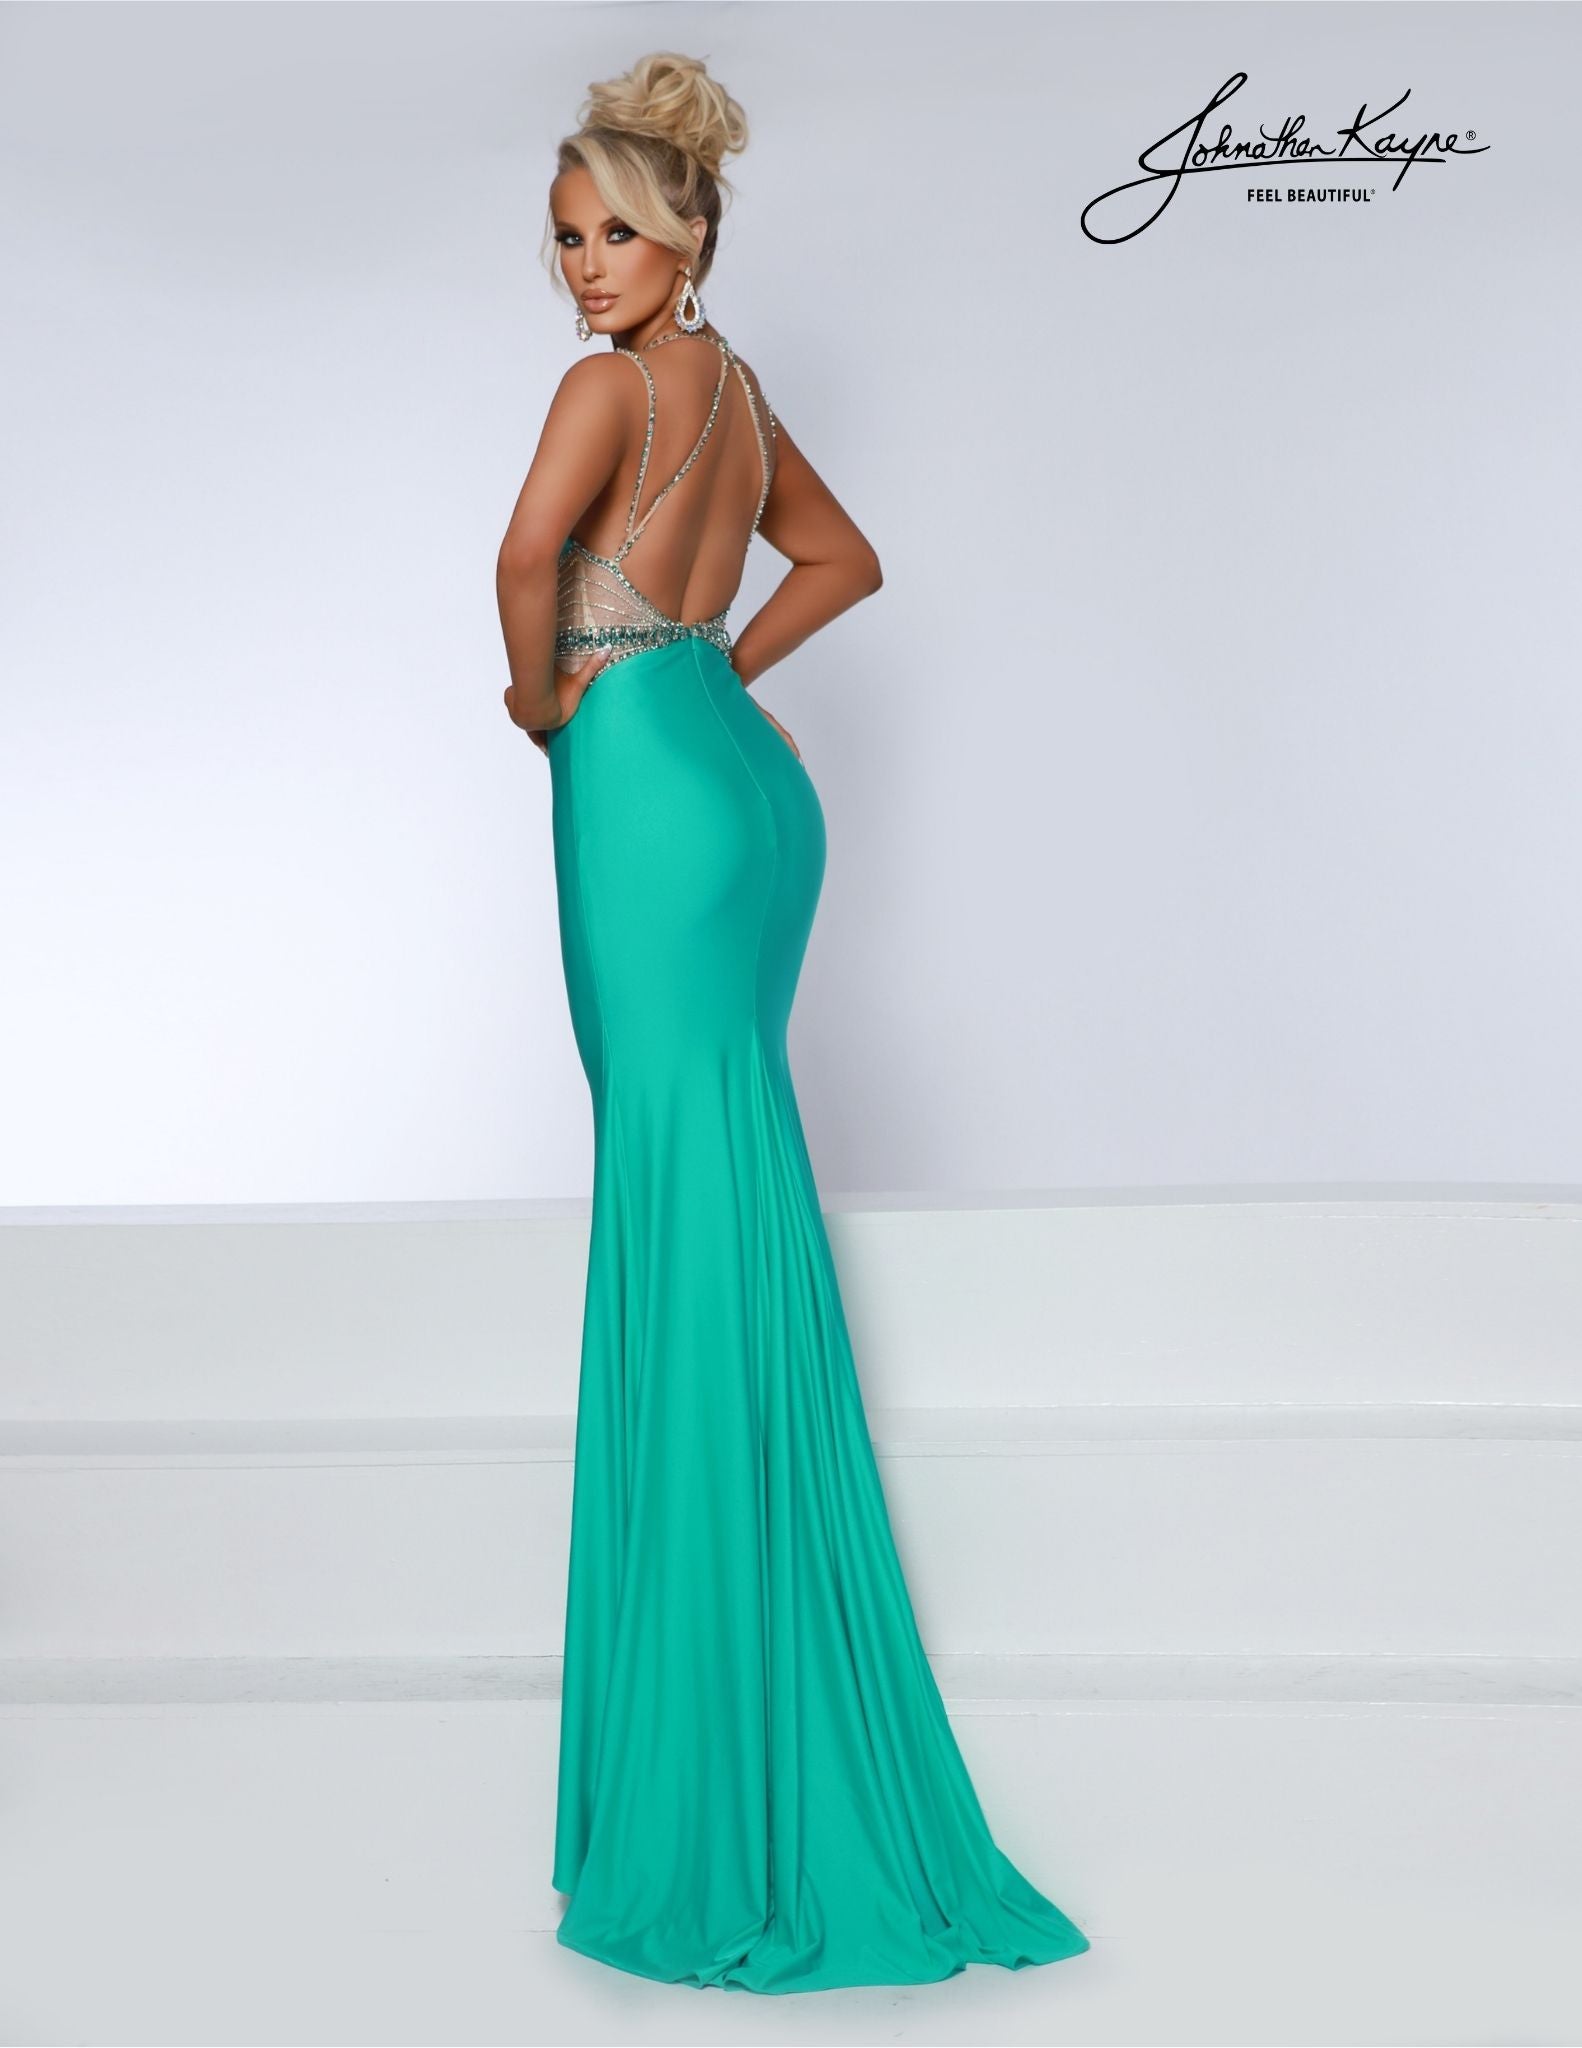 Johnathan Kayne 2808 long prom dress features a stunning beaded design, sheer side cut-outs and a deep V neckline. The perfect formal gown for pageants, dances, and special occasions. Experience elegance and comfort in this 4-Way Stretch Lycra gown. The beaded sheer side cut-outs and deep V neckline create a sultry, stylish look for any special occasion.